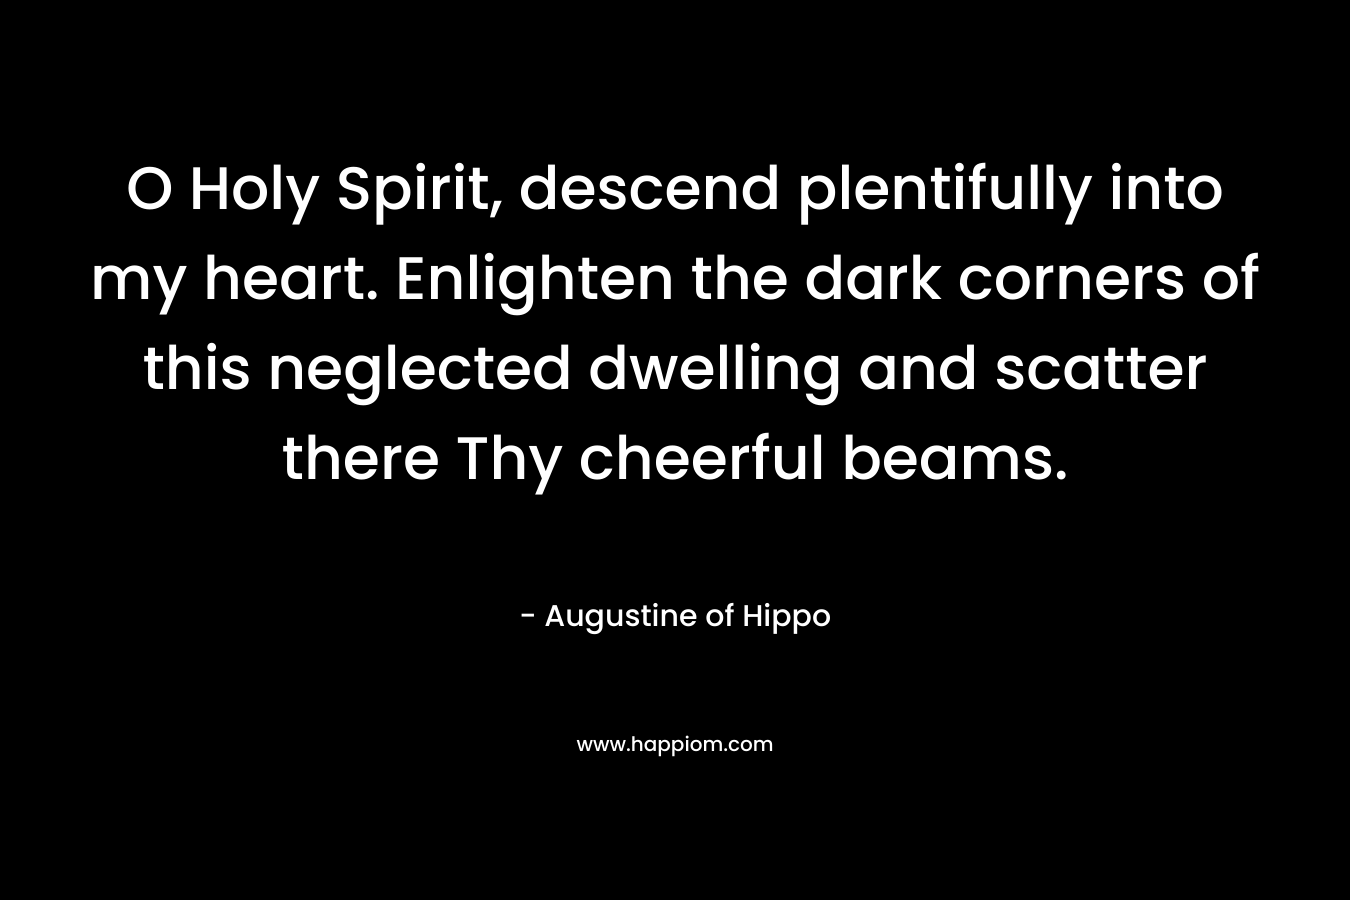 O Holy Spirit, descend plentifully into my heart. Enlighten the dark corners of this neglected dwelling and scatter there Thy cheerful beams. – Augustine of Hippo